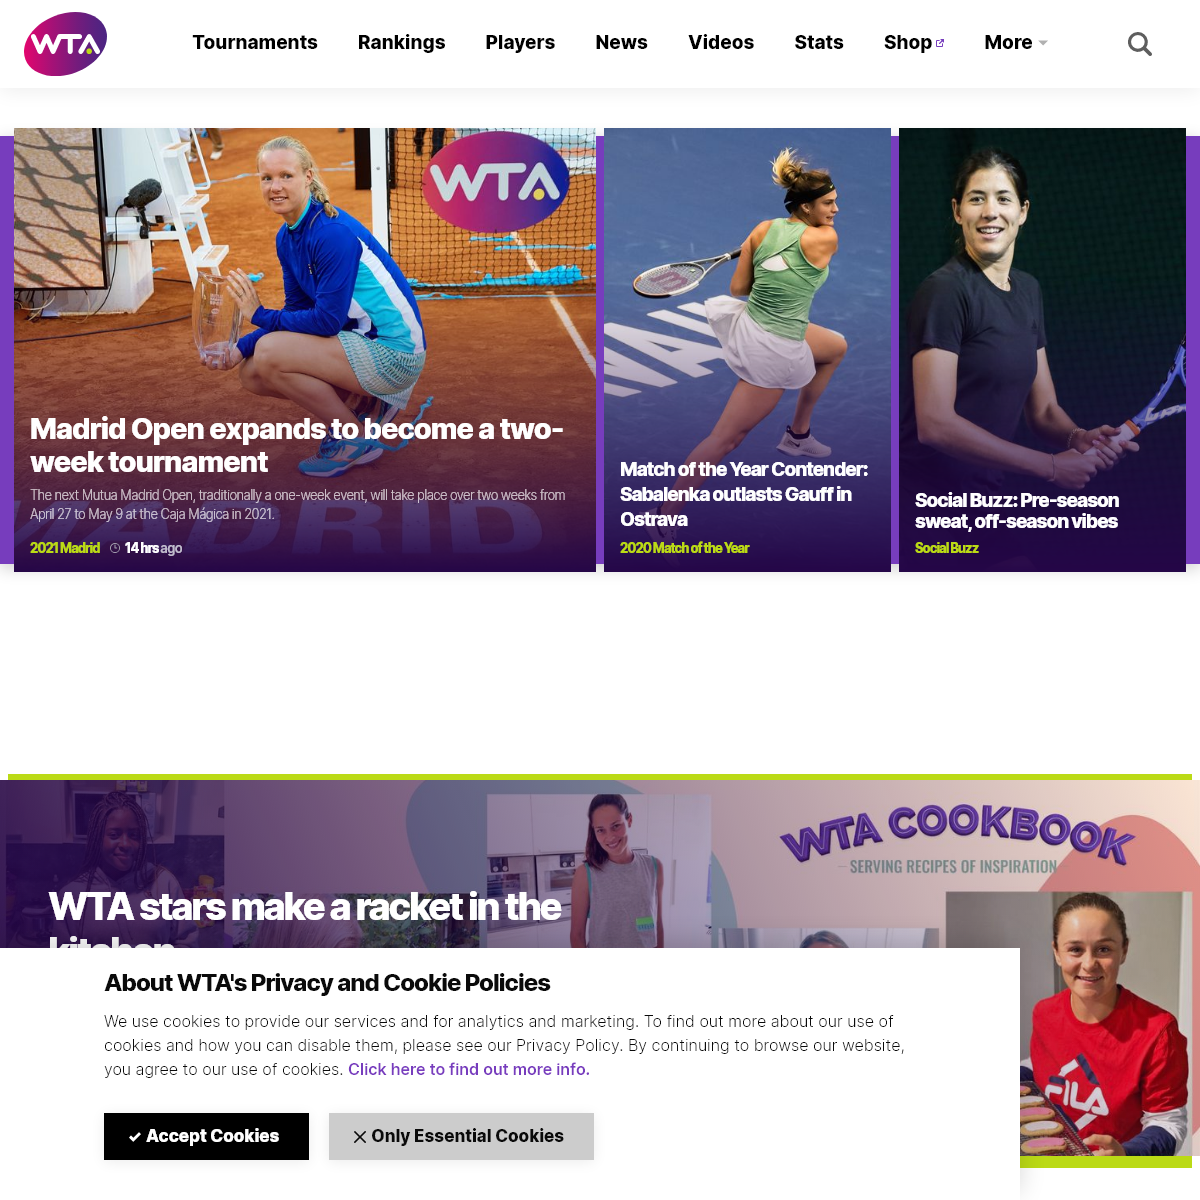 A complete backup of wtatennis.com